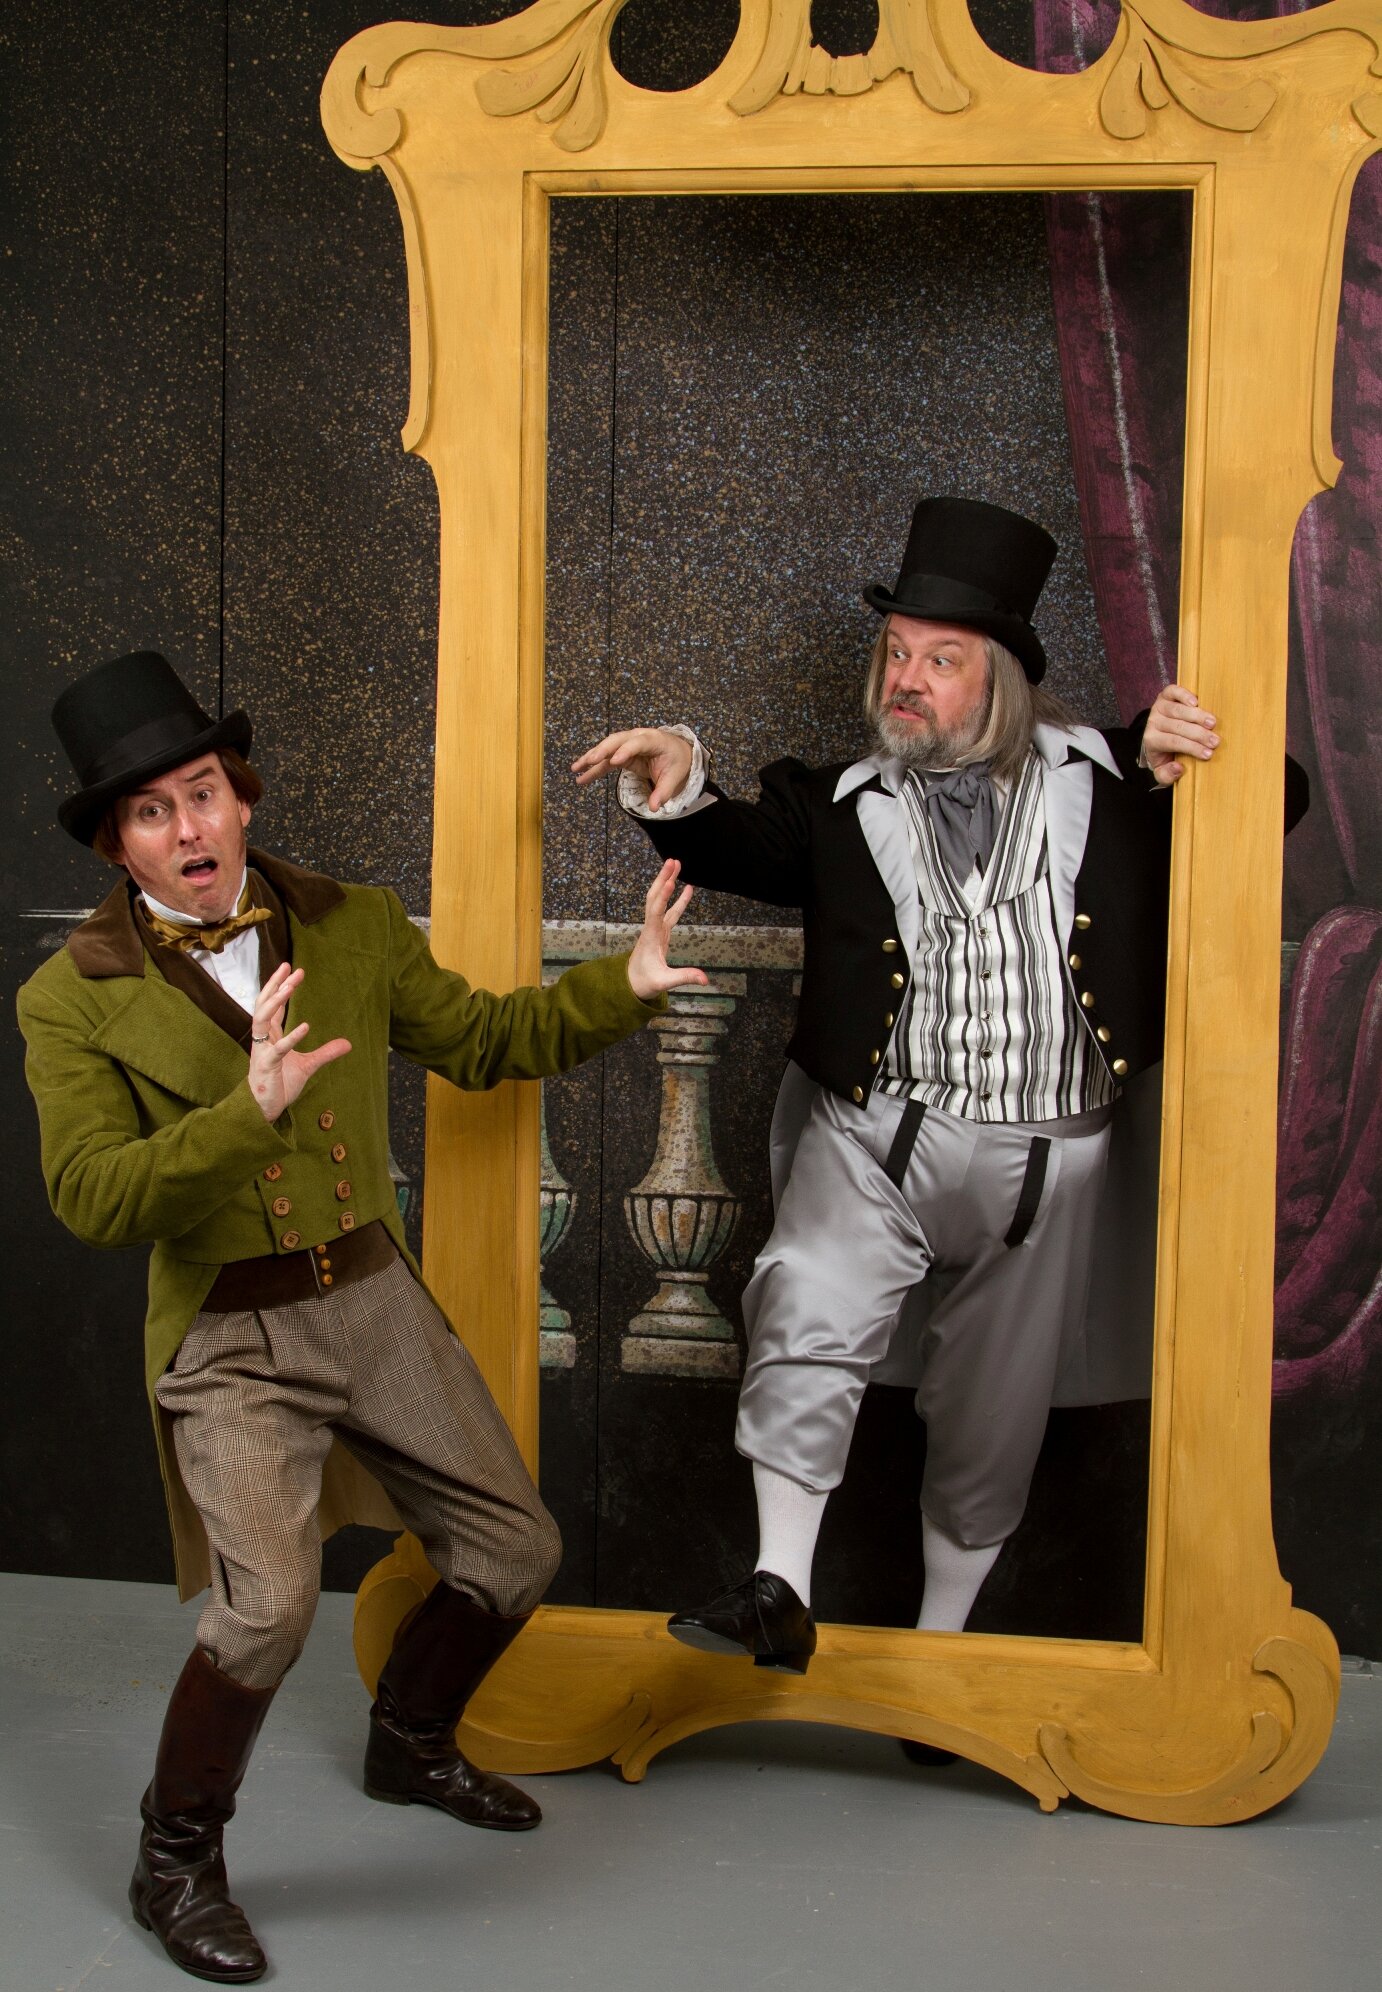 Robin Oakapple (John Brookes) is terrified as the portrait of his uncle, Sir Roderic (William Darkow) comes to life to scold him in the Seattle Gilbert & Sullivan Society’s comic opera Ruddigore. (Photo: Patrick André)